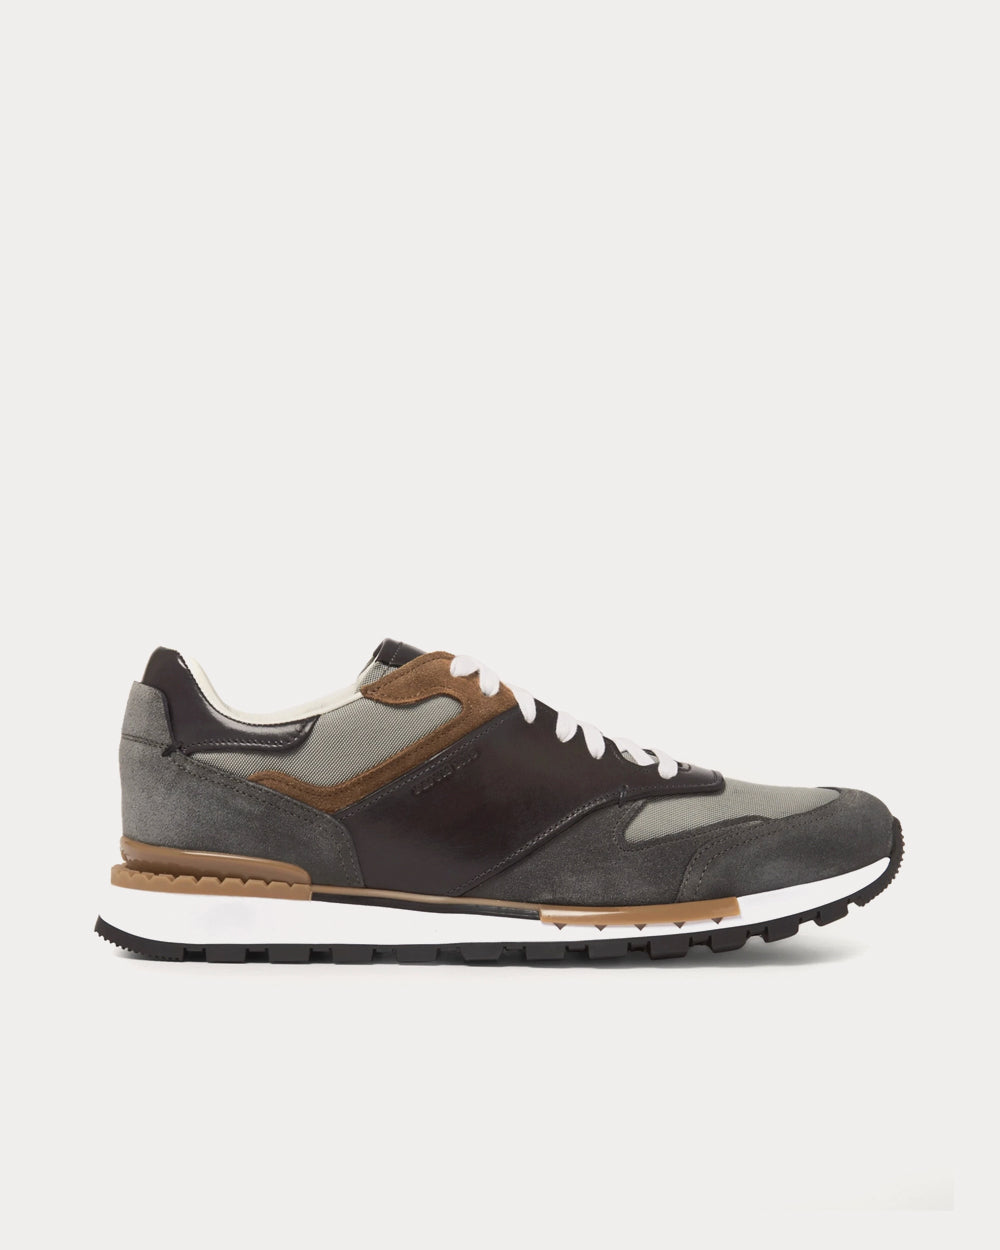 Berluti - Run Track Leather, Suede and Mesh Grey Low Top Sneakers